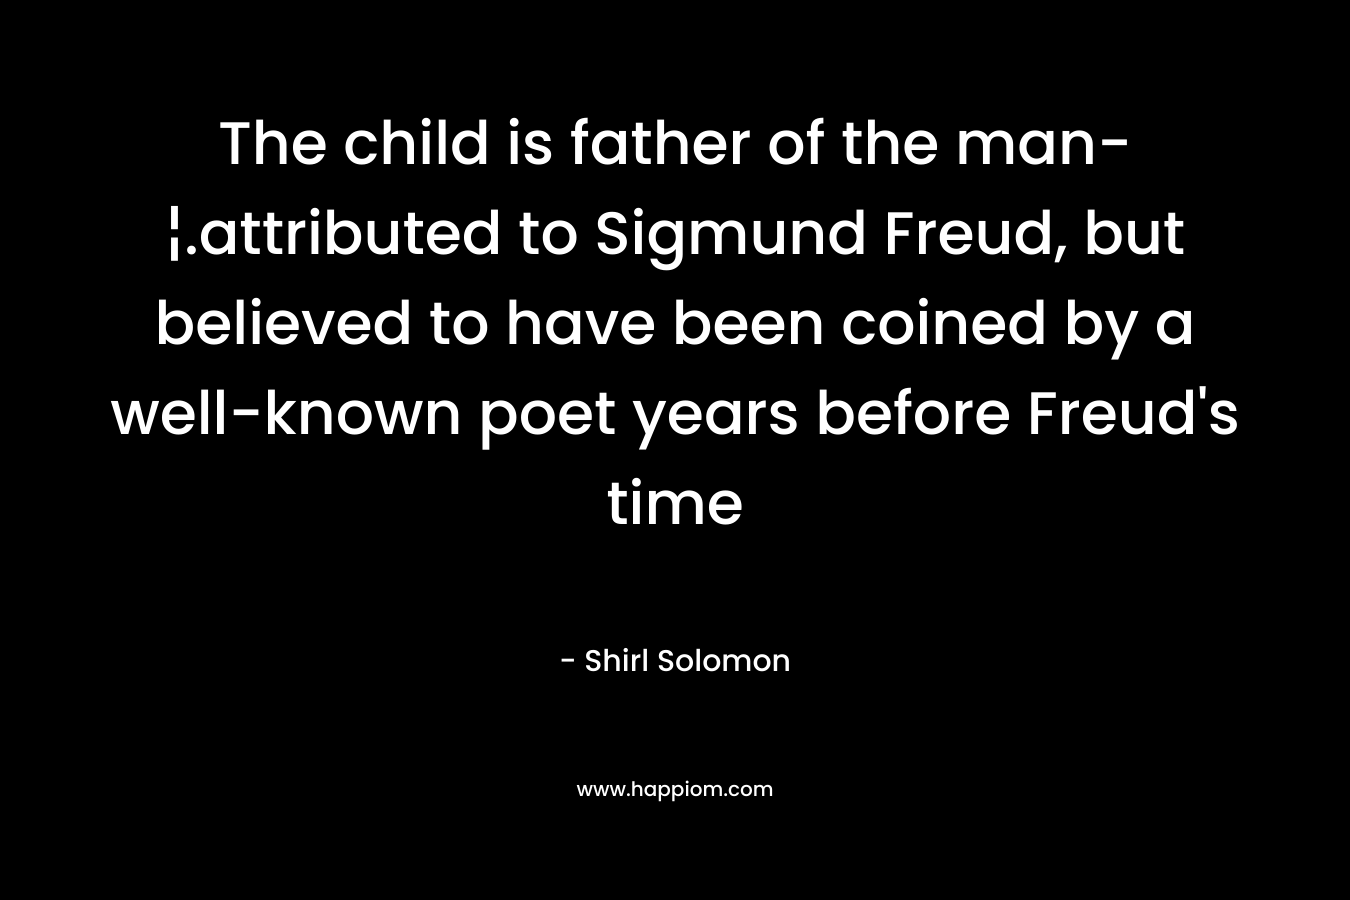 The child is father of the man-¦.attributed to Sigmund Freud, but believed to have been coined by a well-known poet years before Freud's time